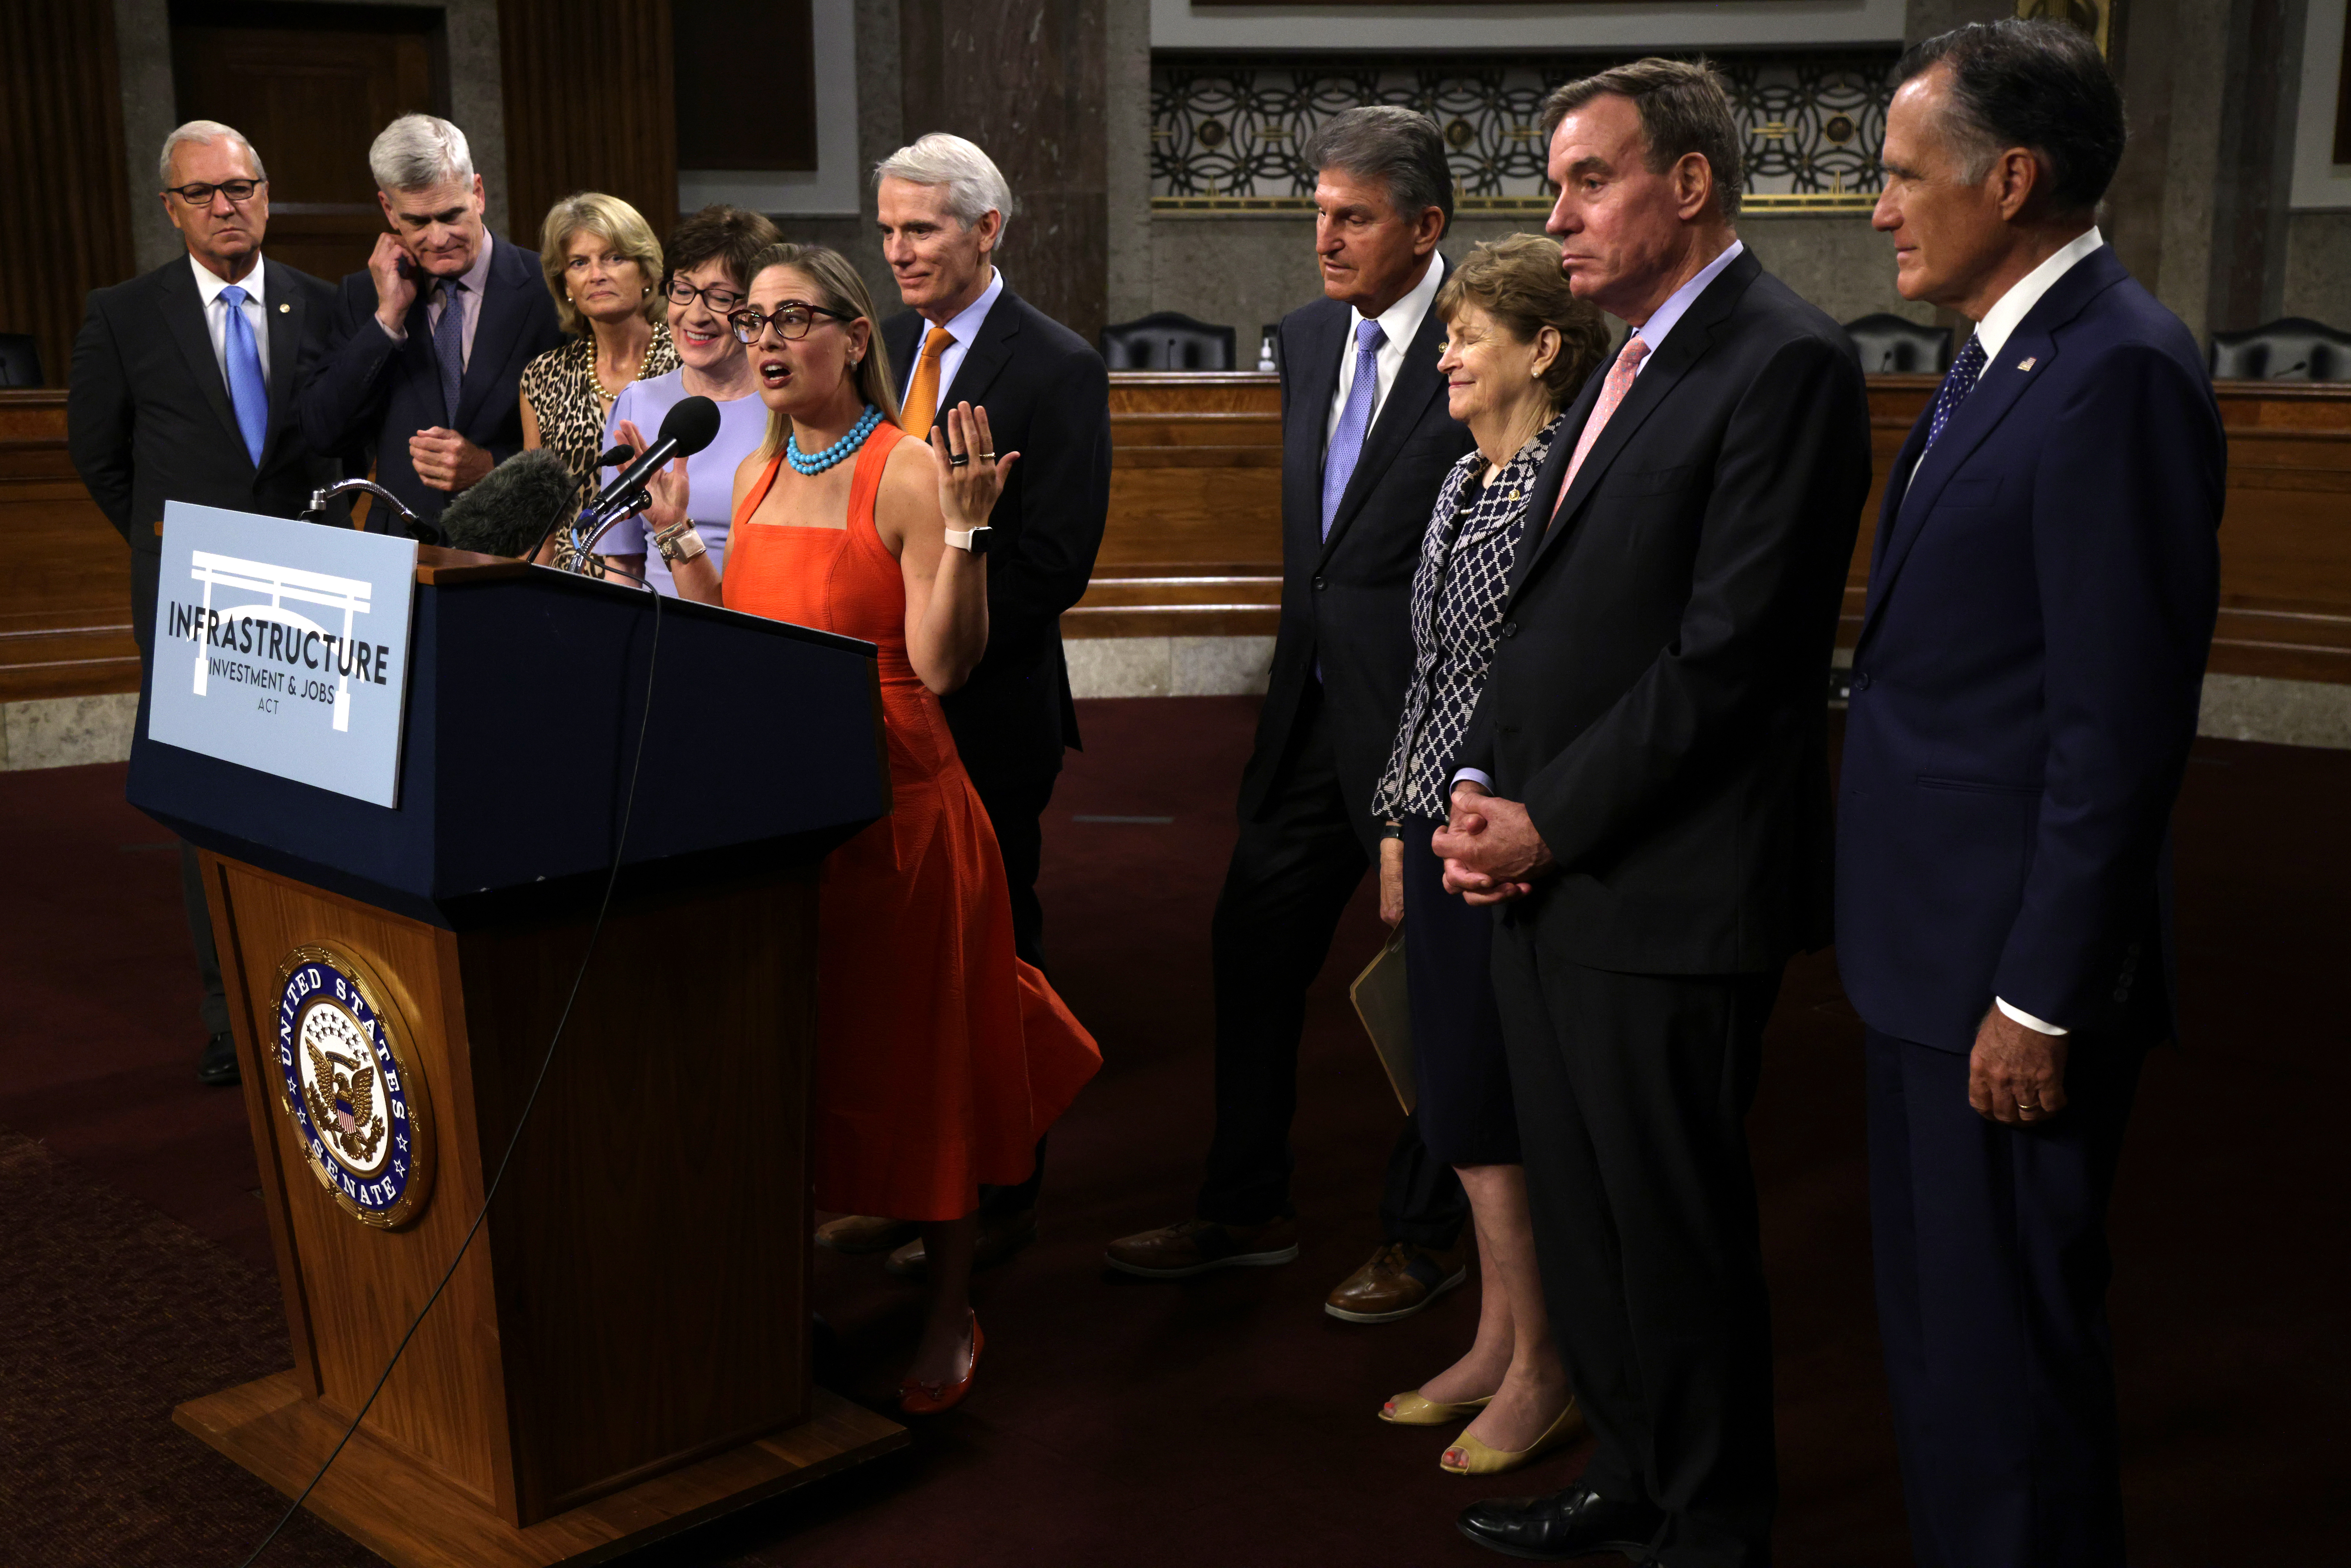 Sen. Kyrsten Sinema speaks about infrastructure during a news conference alongside bipartisan Senate colleagues on July 28. (Alex Wong/Getty Images)